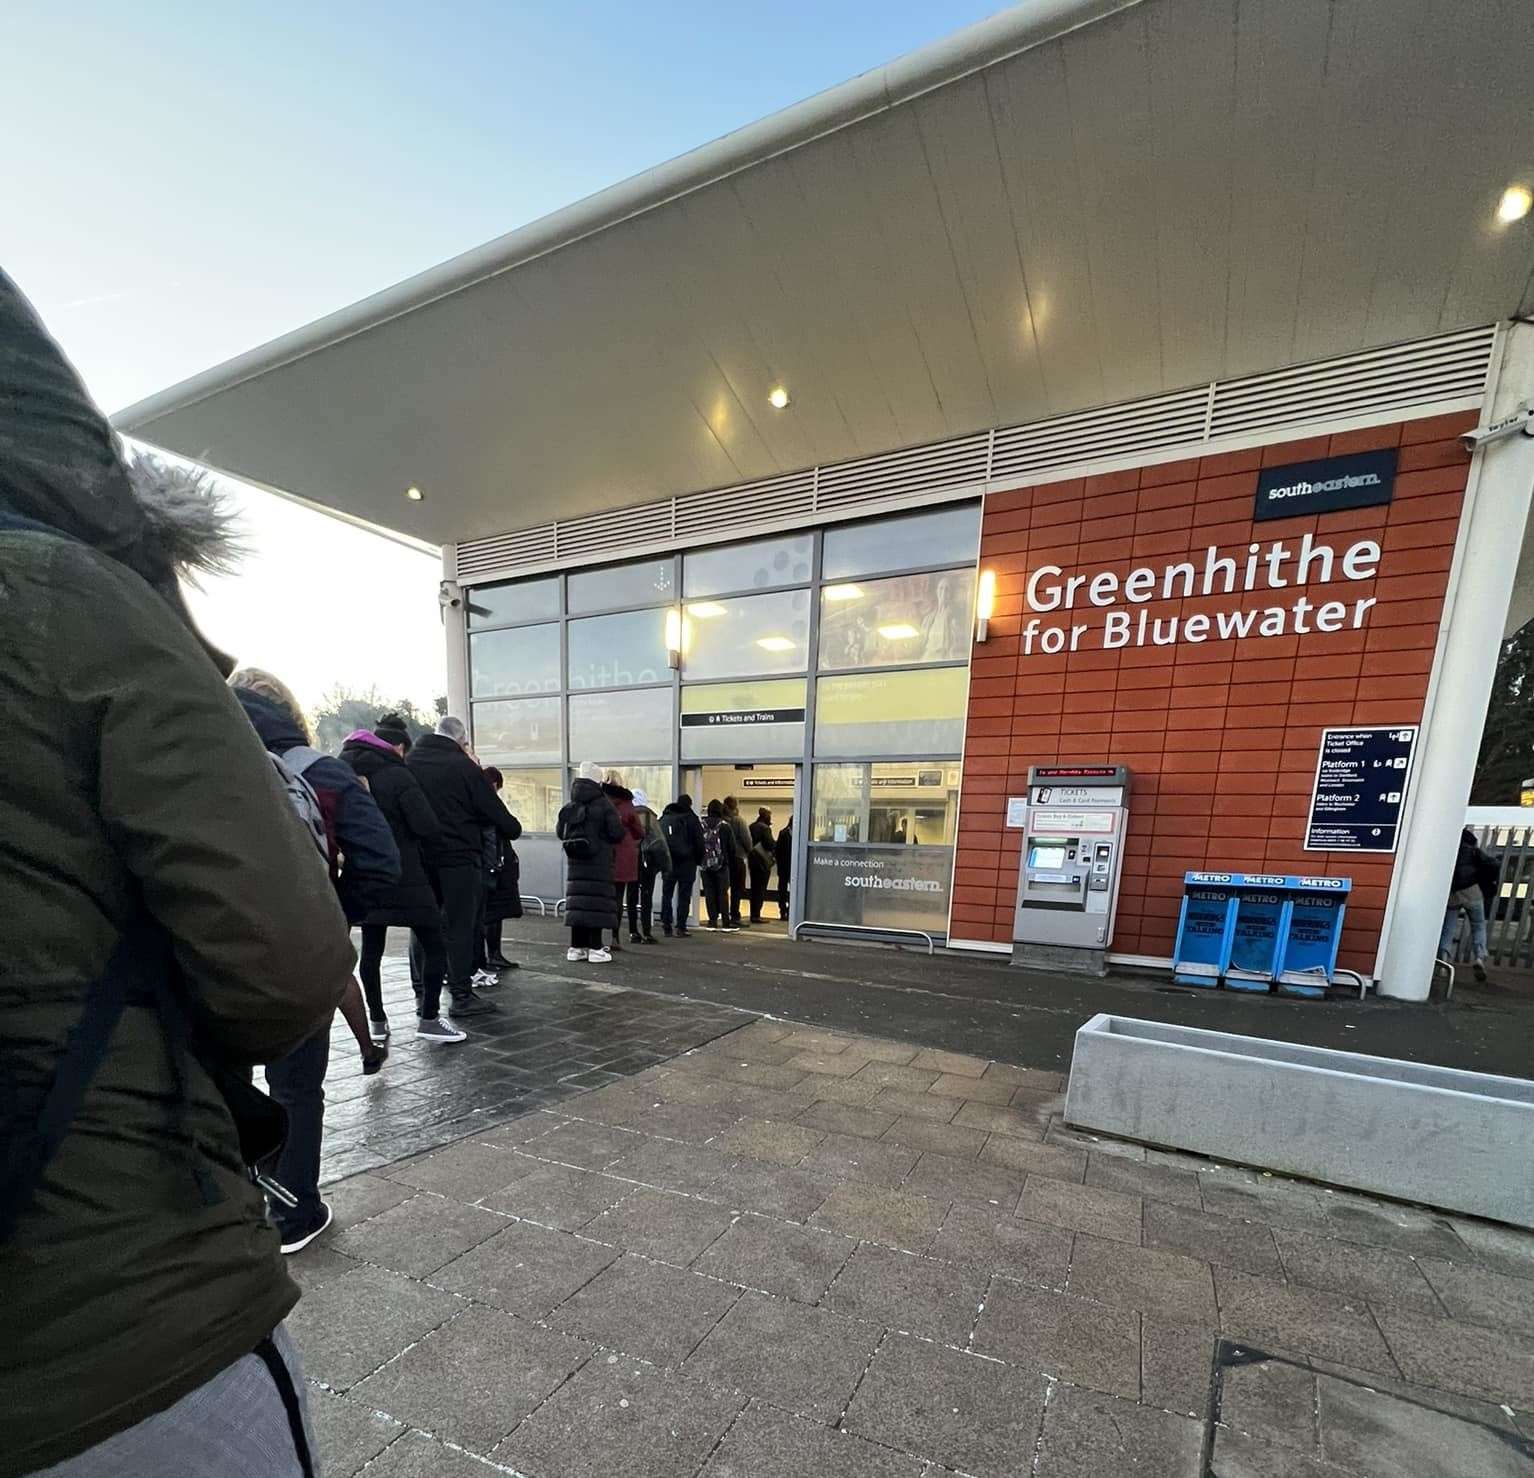 There were long queues outside Greenhithe Station on Monday morning due to a broken ticket machine. Photo: Marina